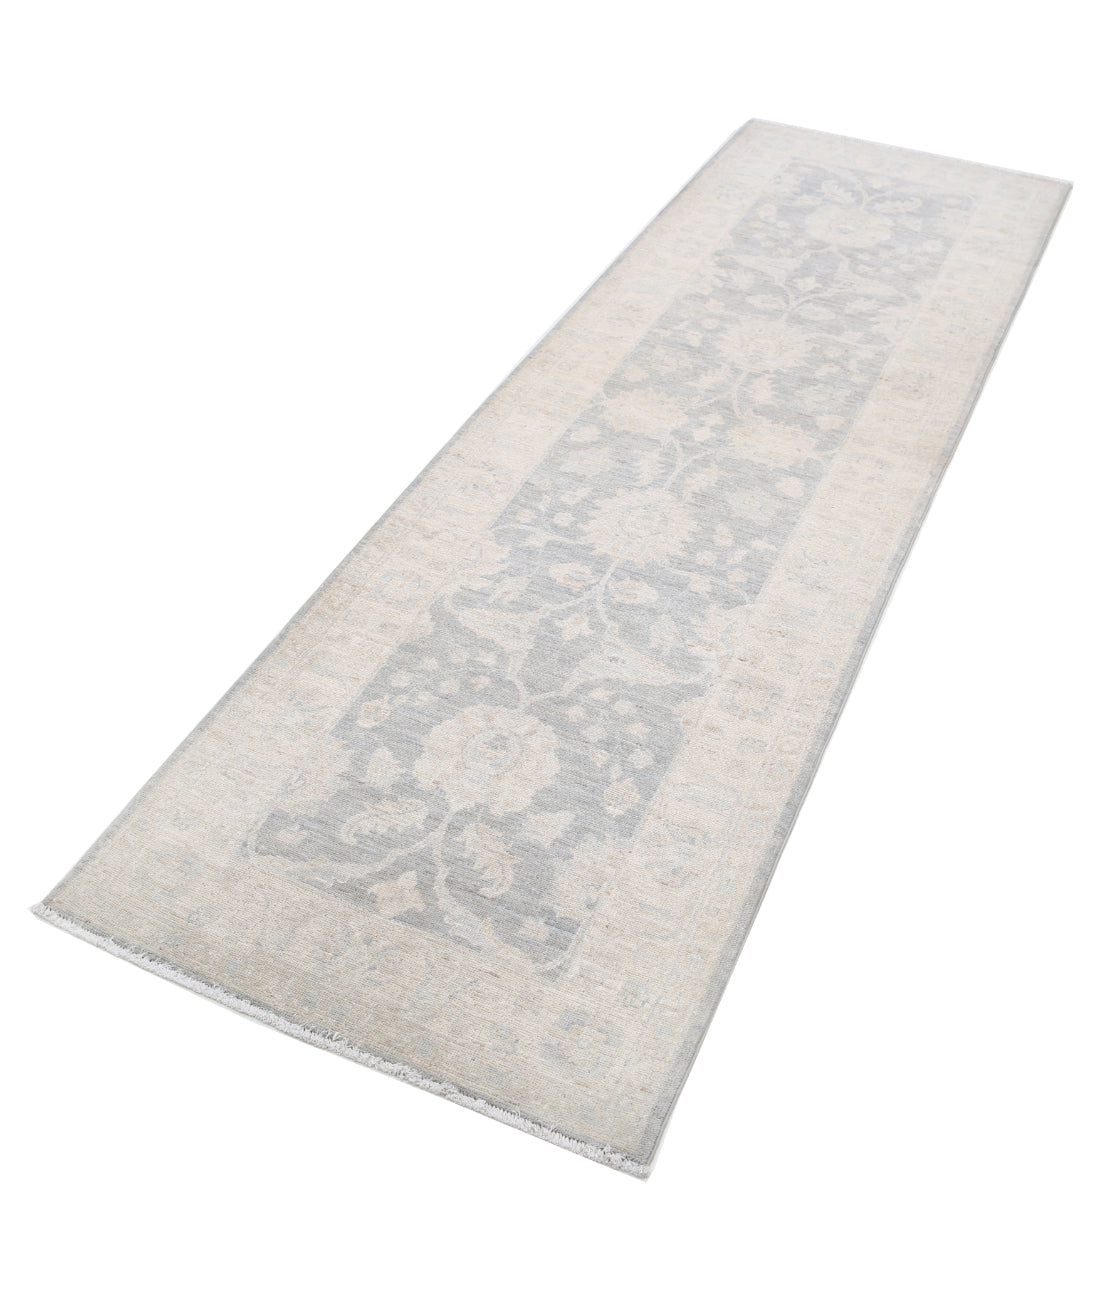 Hand Knotted Serenity Wool Rug - 2'7'' x 8'4'' 2'7'' x 8'4'' (78 X 250) / Grey / Ivory